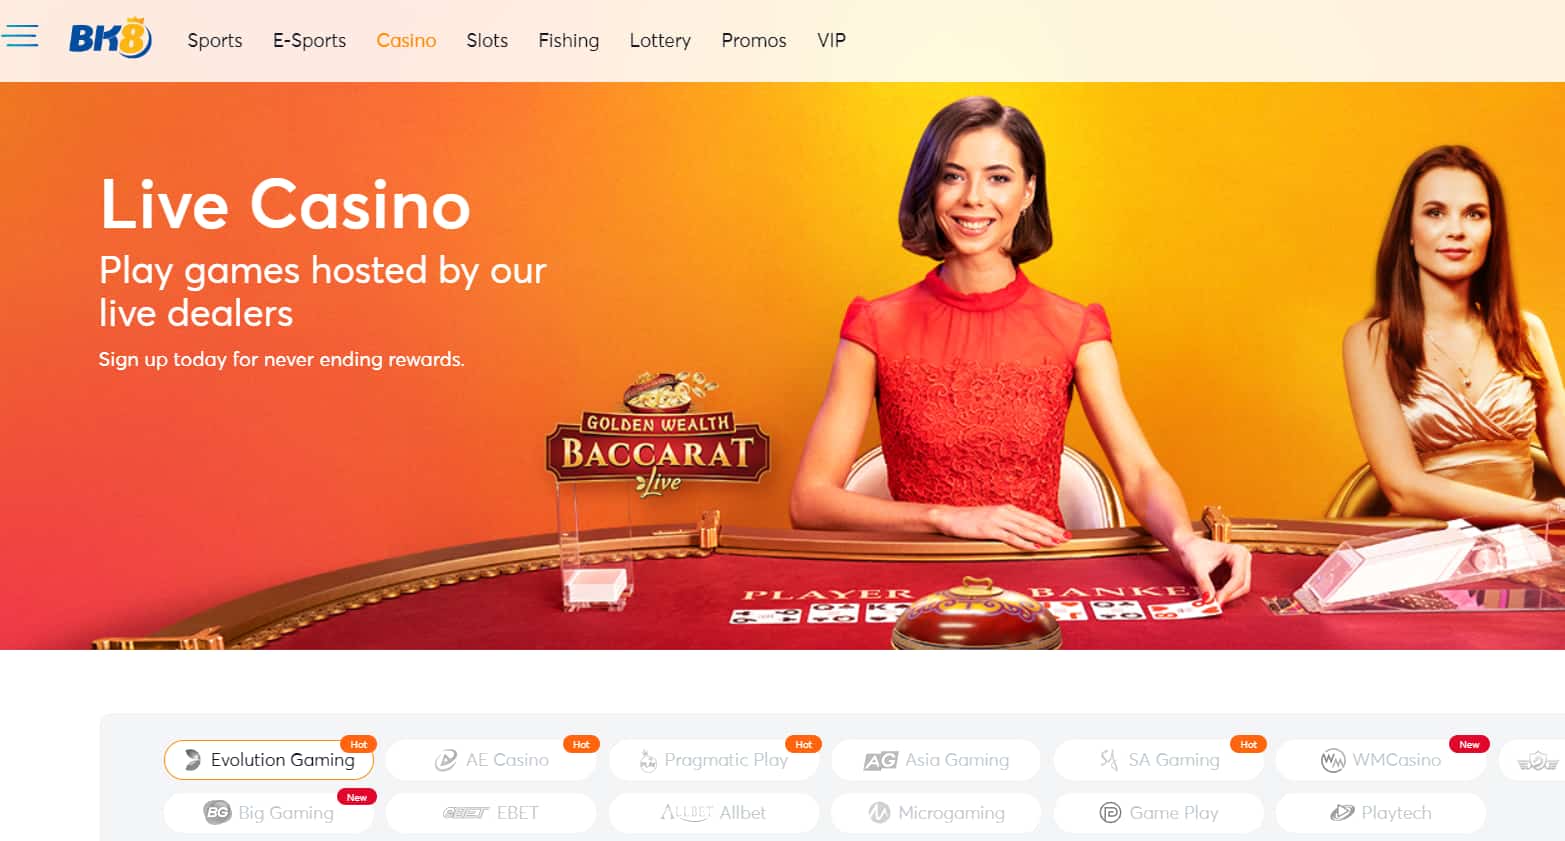 Bet365: The Casino Site That Offers The Best Gaming Variety And Casino Bonus For Indian Players